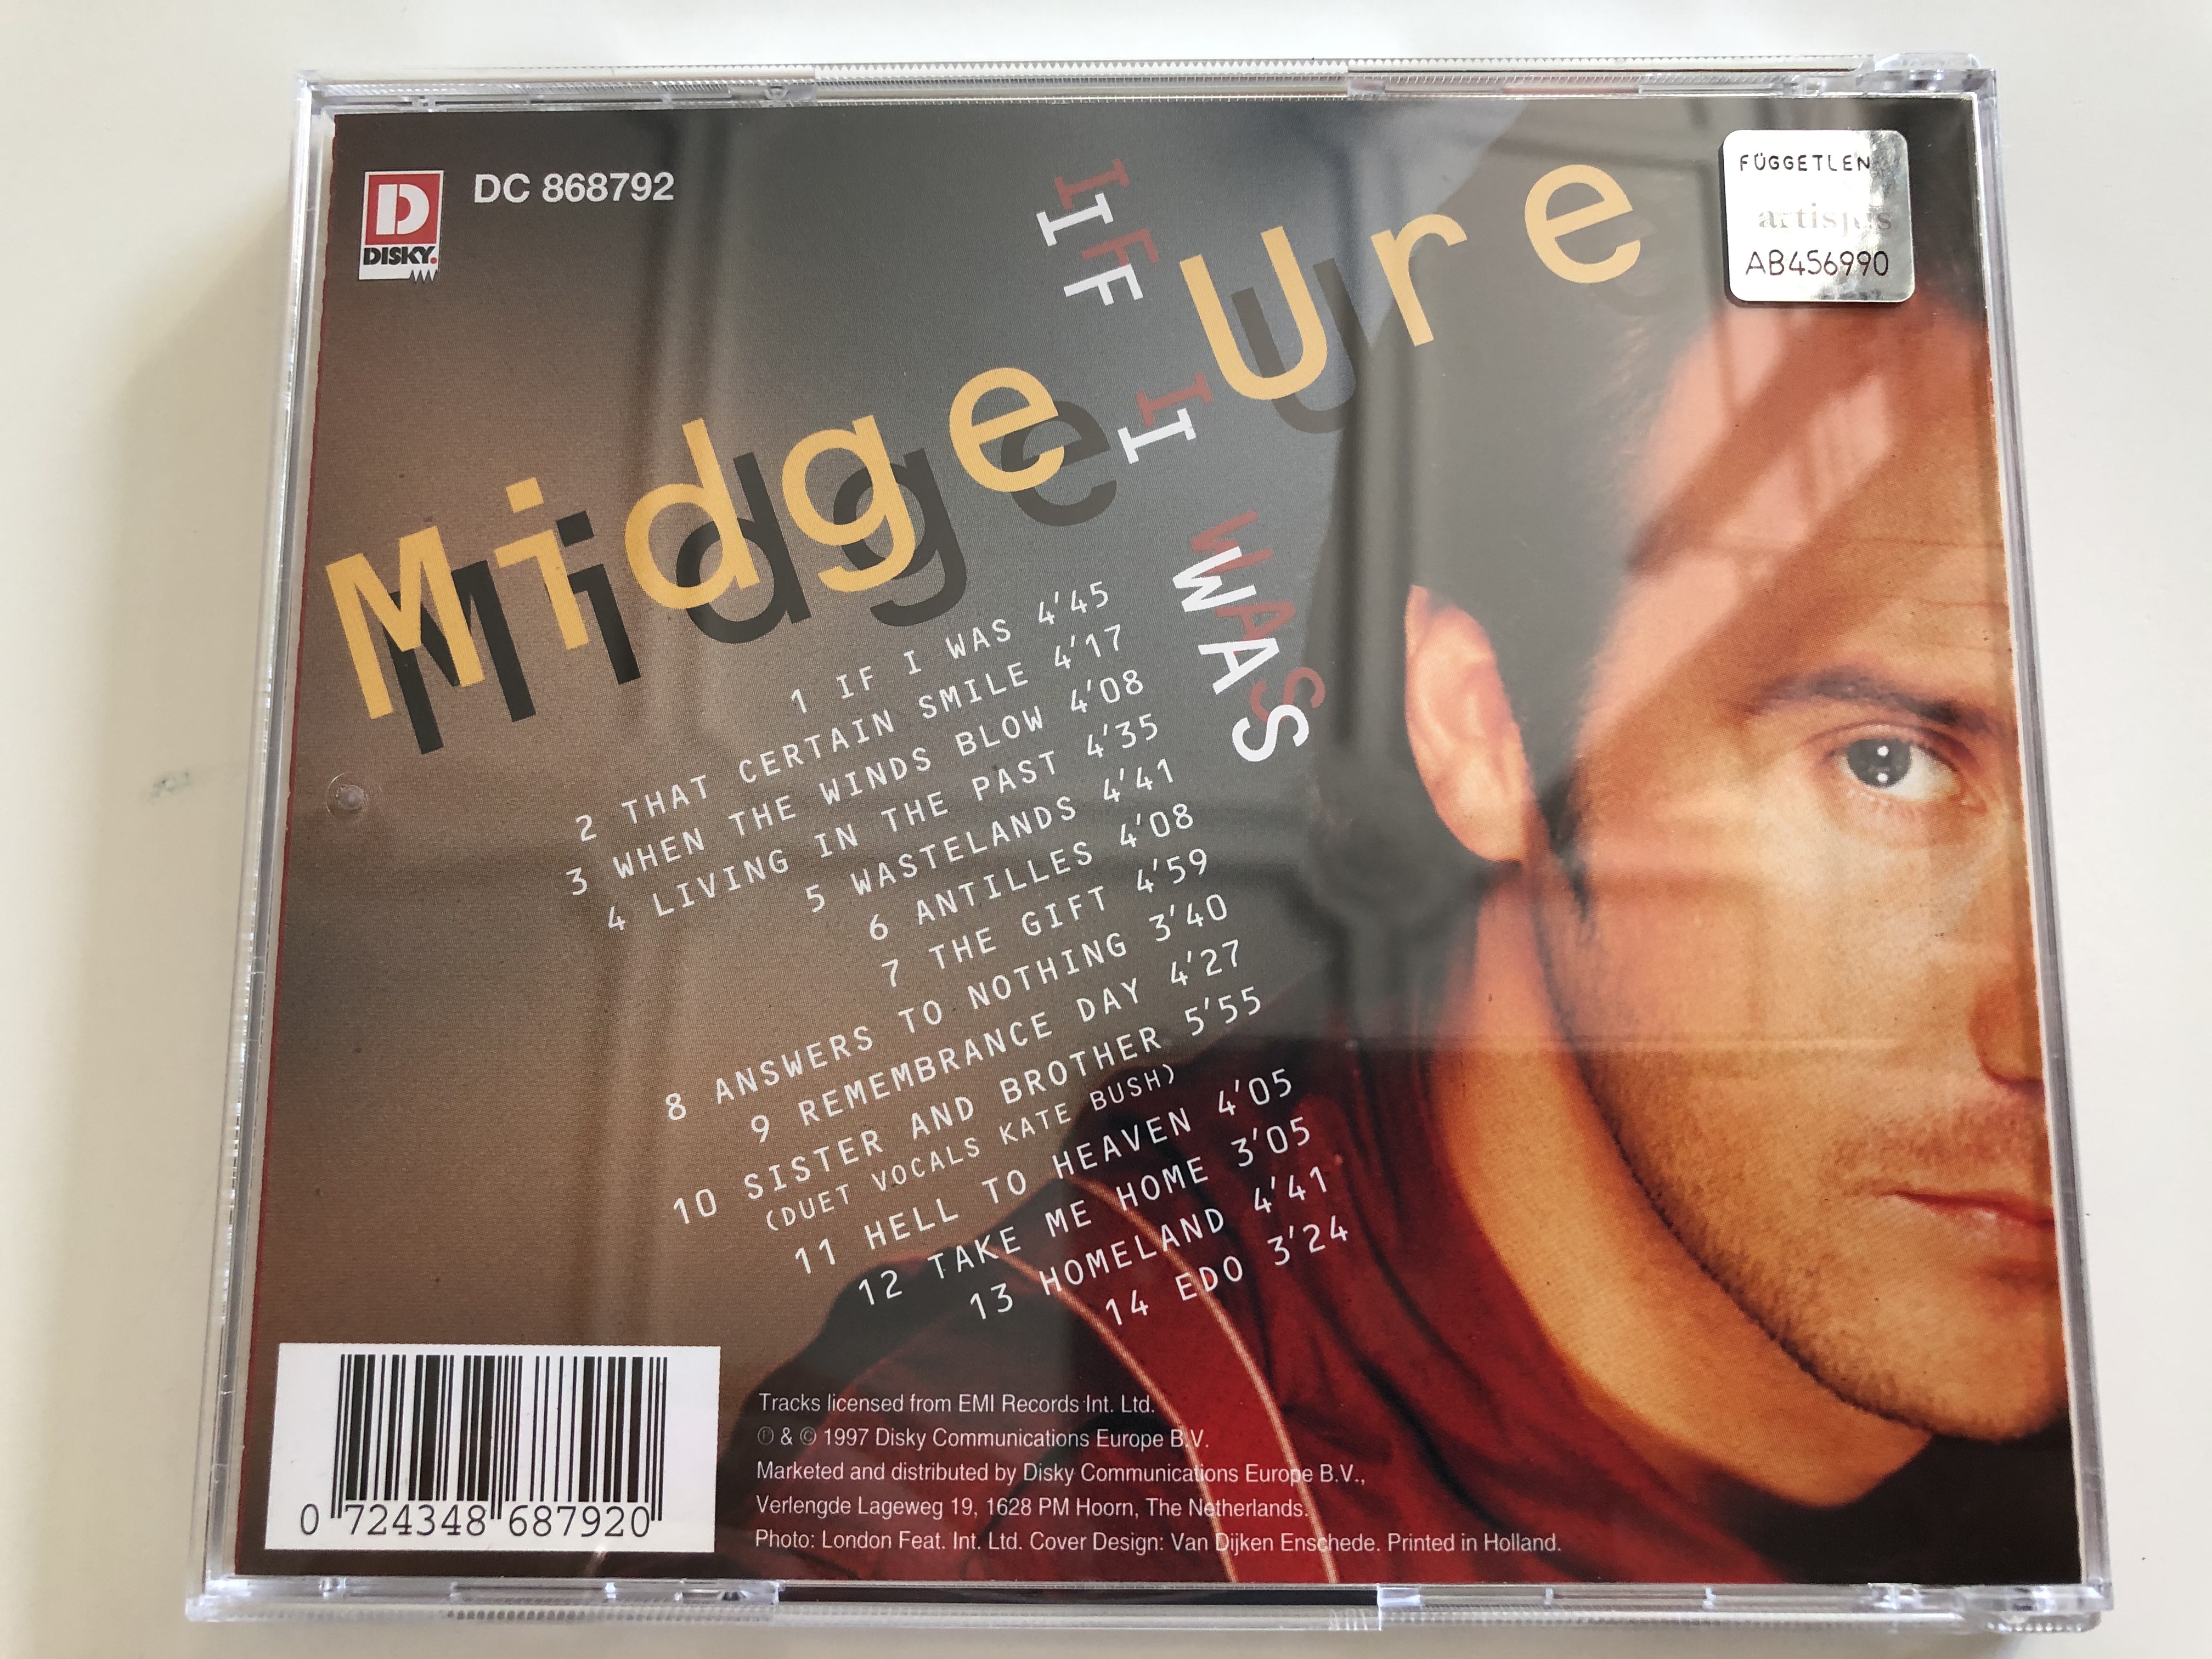 midge-ure-if-i-was-that-certain-smile-wastelands-answers-to-nothing-disky-audio-cd-1997-dc-868792-4-.jpg